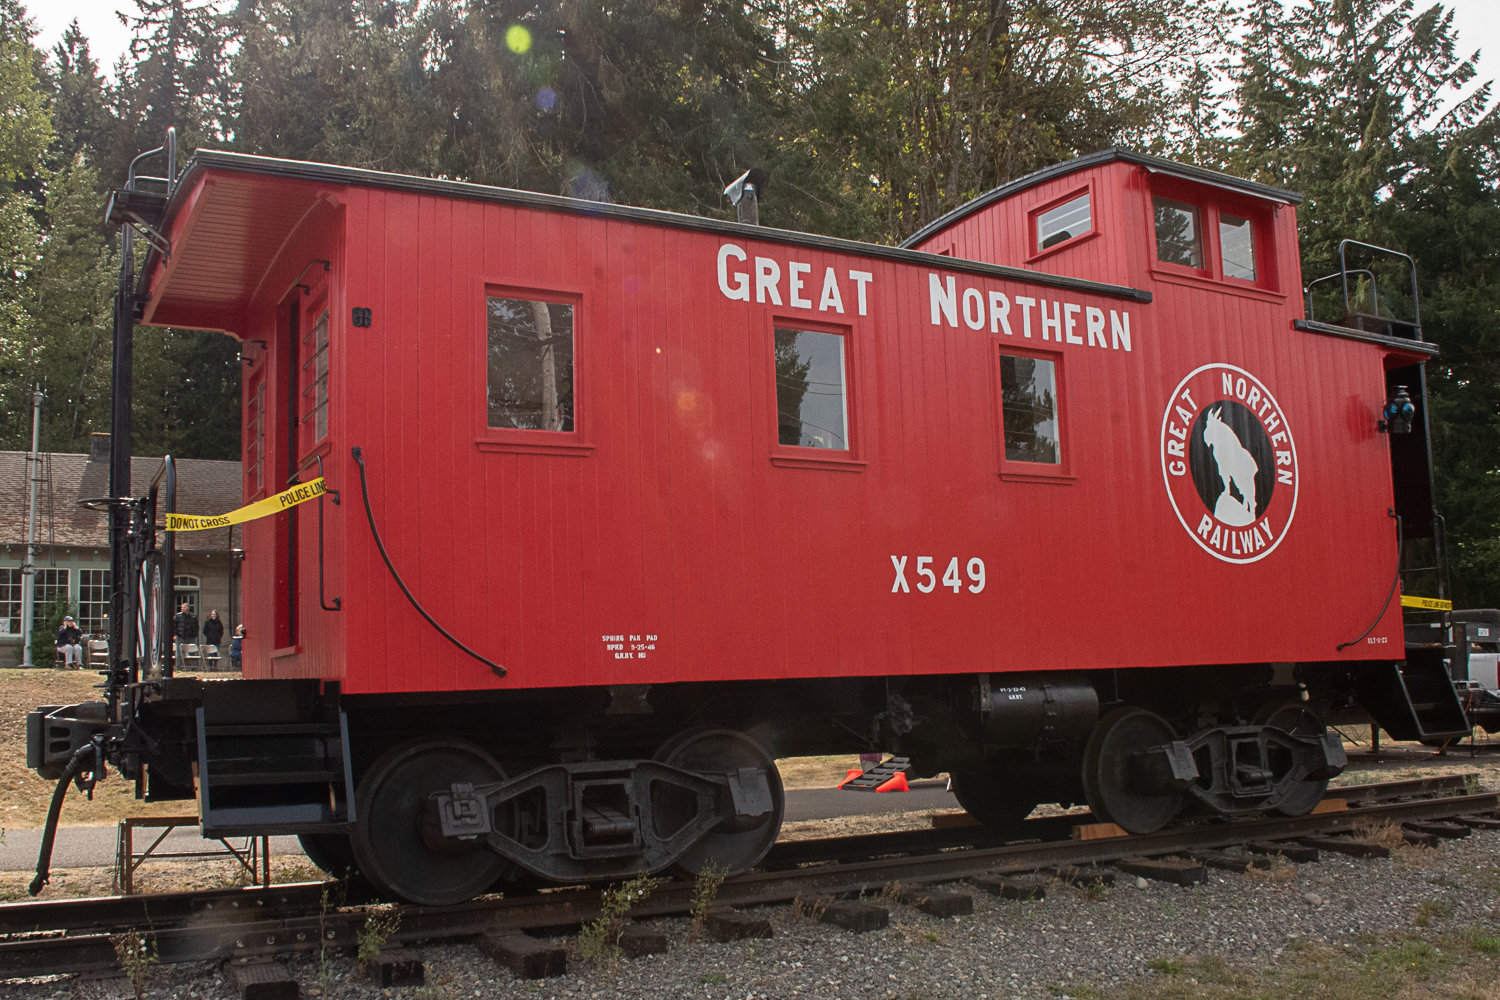 The fully restored 1923 Great Northern Railway caboose now stands proudly in front of the Tenino Depot Museum. Photo by Owen Sexton.